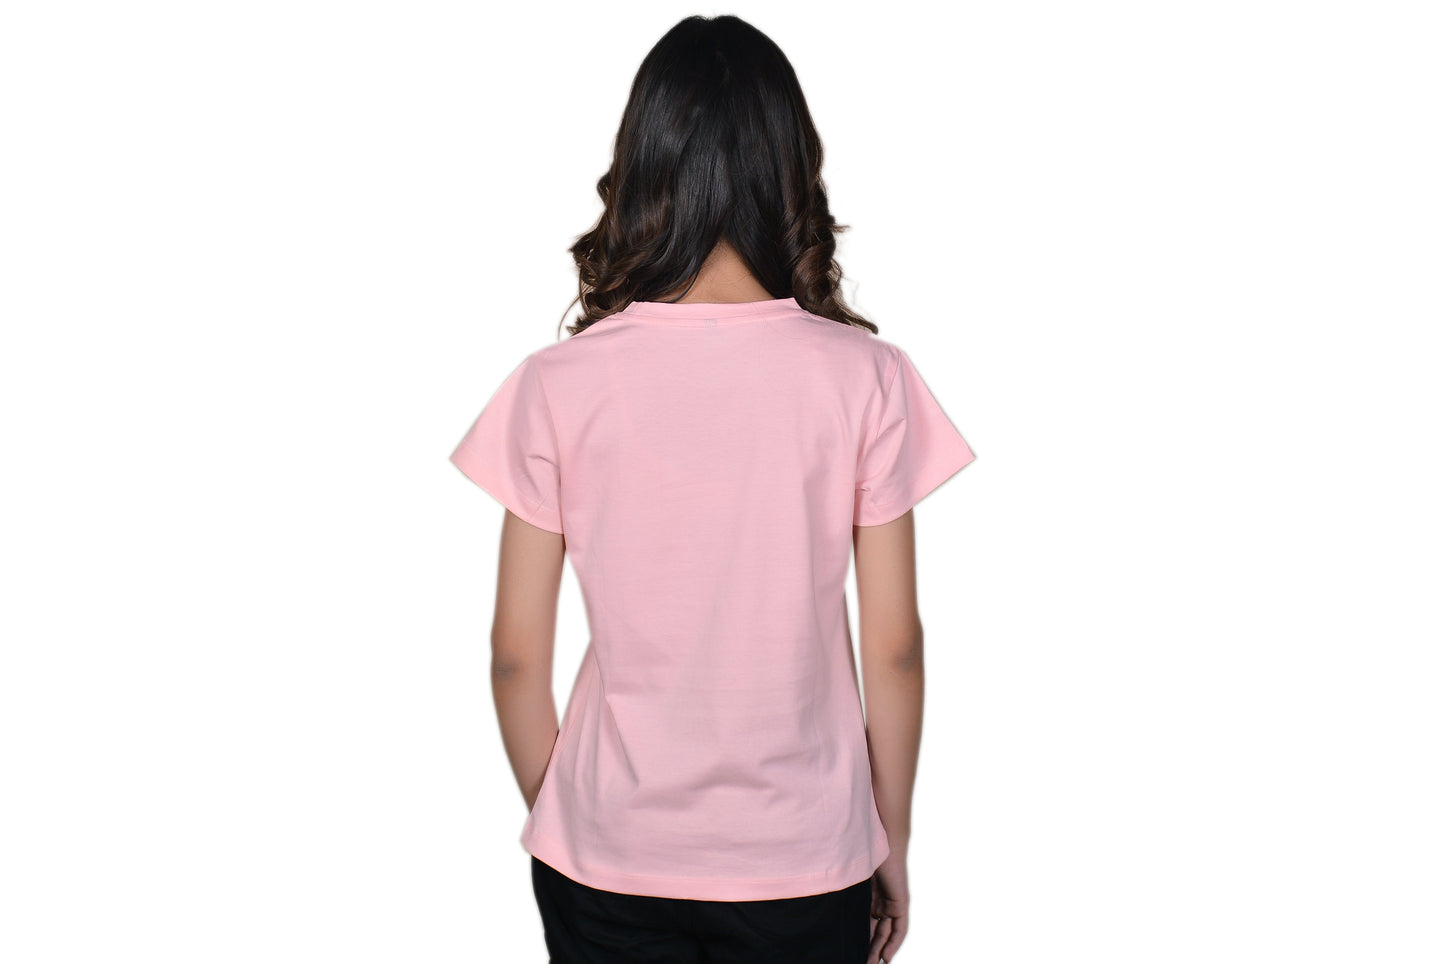 Women's Baby Pink Lovers Graphic Printed Classic Fit Tshirt